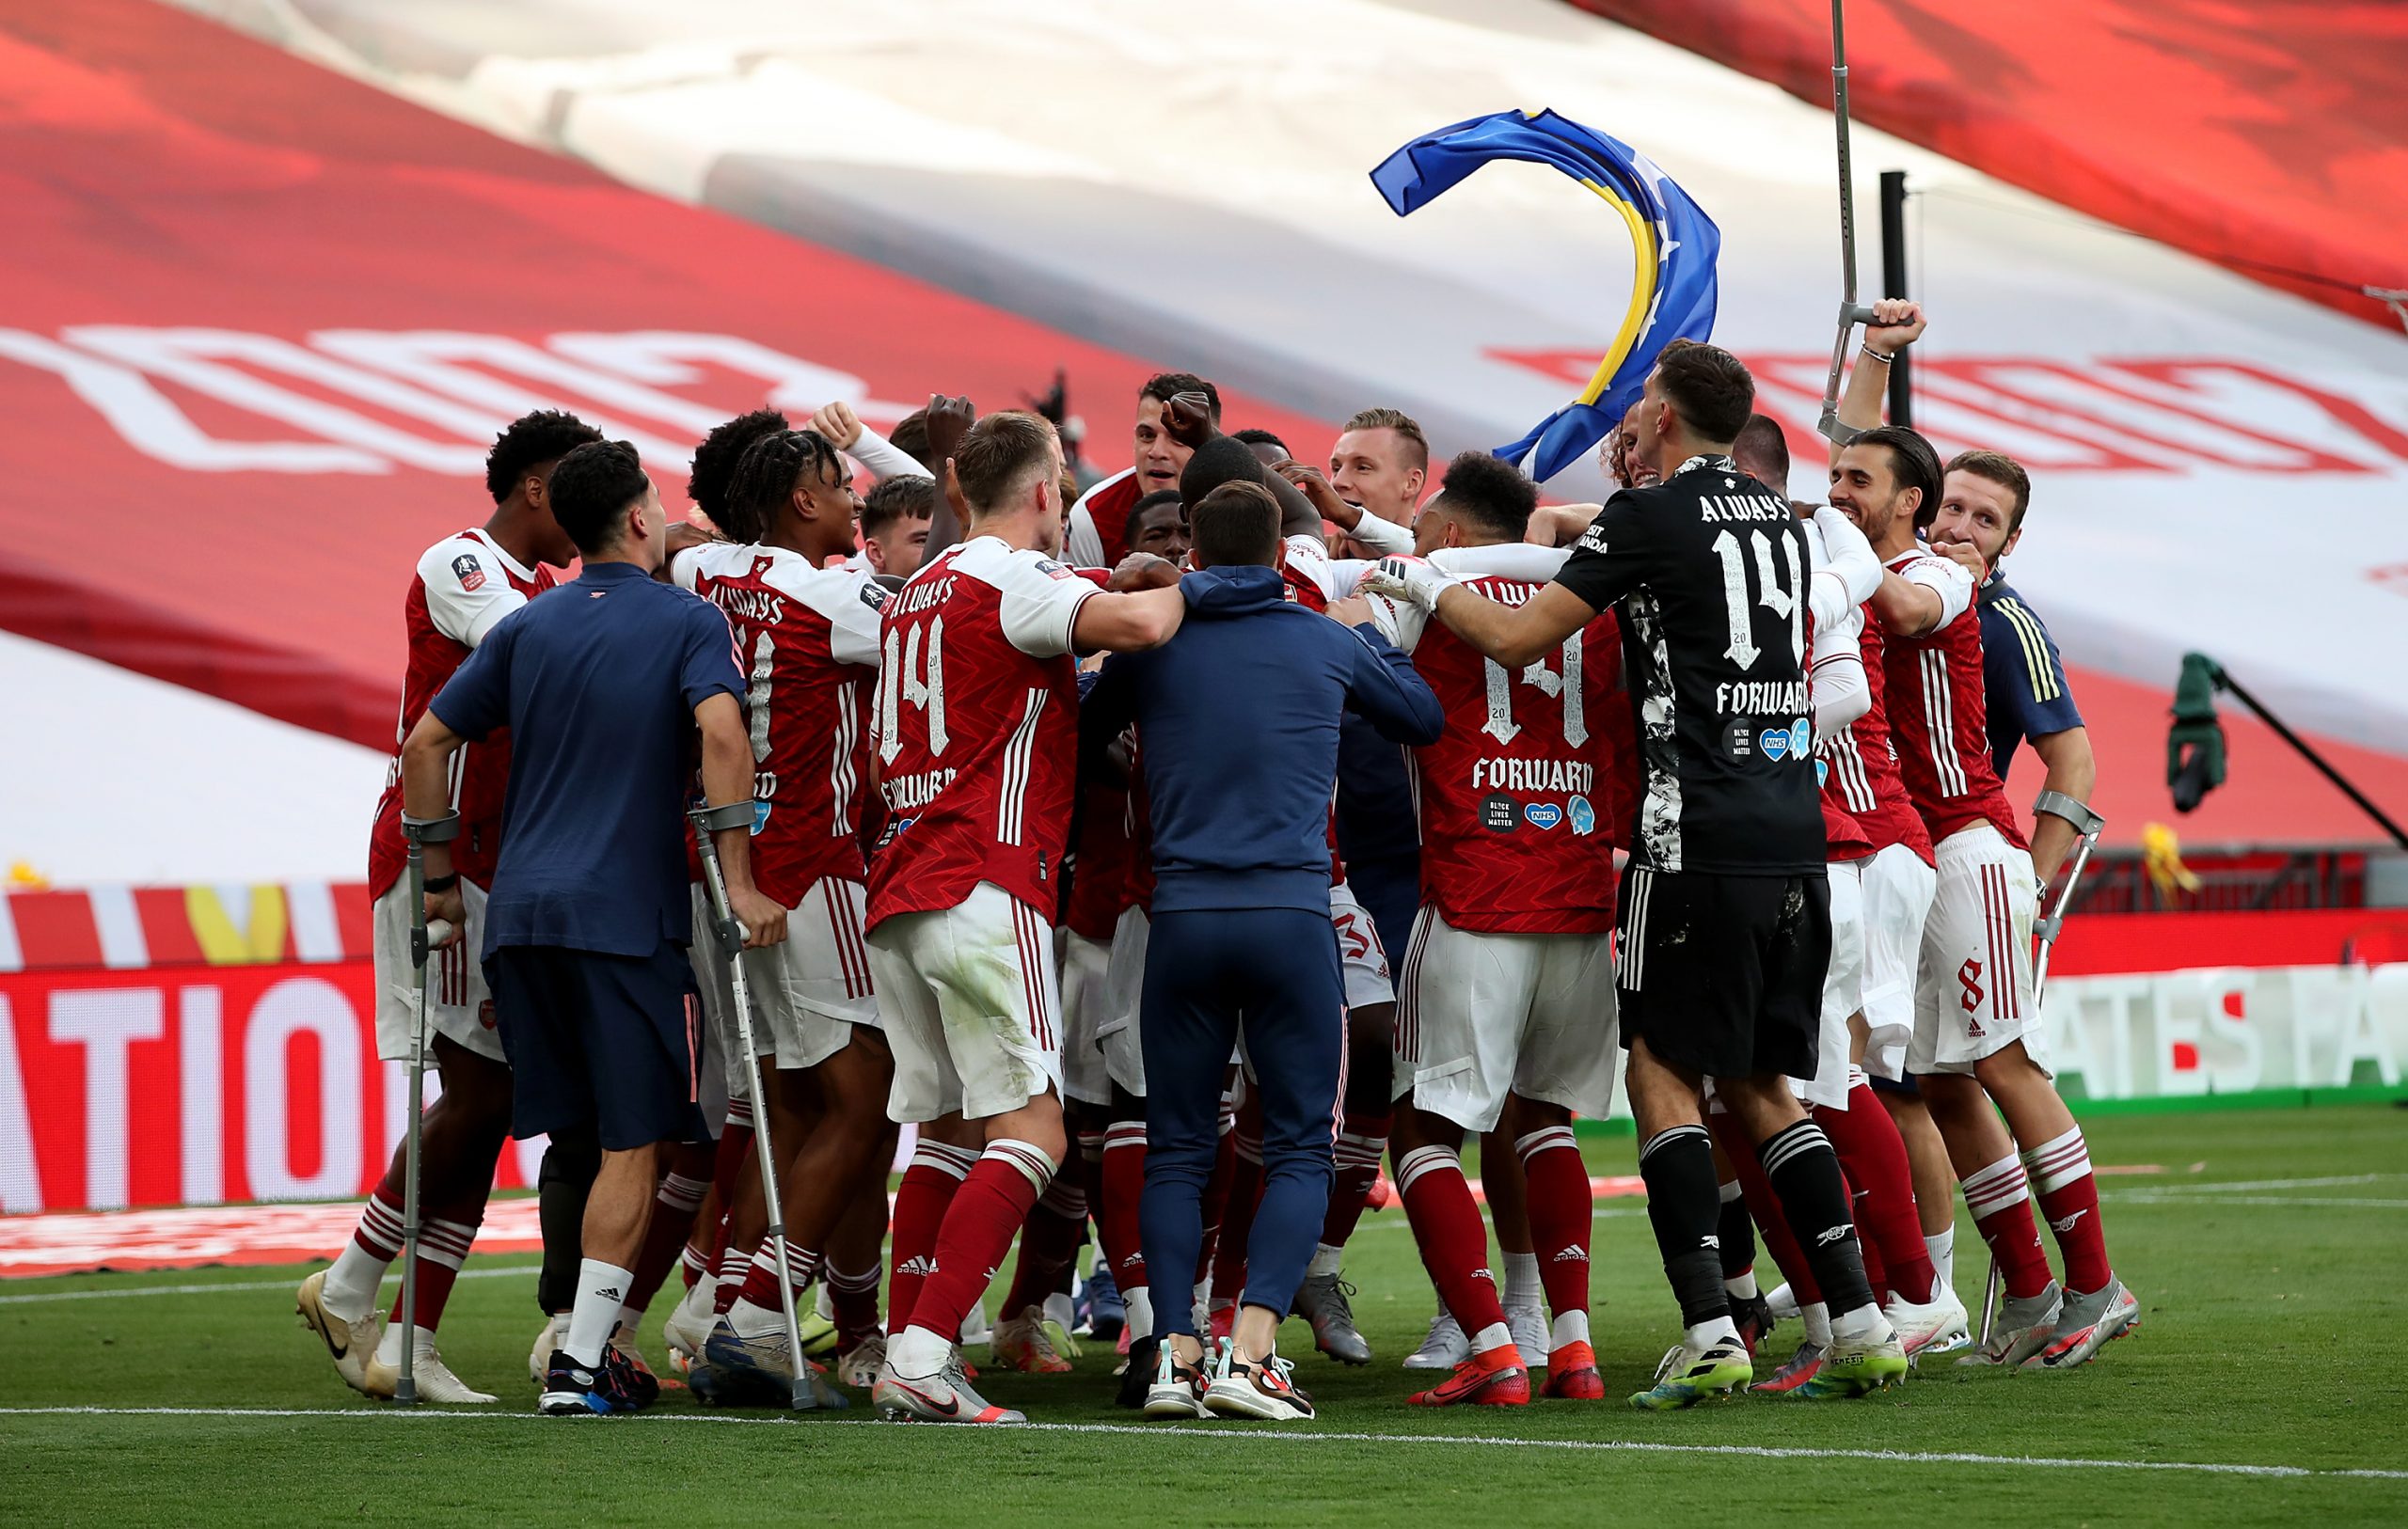 LONDON, ENGLAND - AUGUST 01: Arsenal players celebrates their teams victory in the Heads Up FA Cup Final match between Arsenal and Chelsea at Wembley Stadium on August 01, 2020 in London, England. Football Stadiums around Europe remain empty due to the Coronavirus Pandemic as Government social distancing laws prohibit fans inside venues resulting in all fixtures being played behind closed doors. (Photo by Adam Davy/Pool via Getty Images)